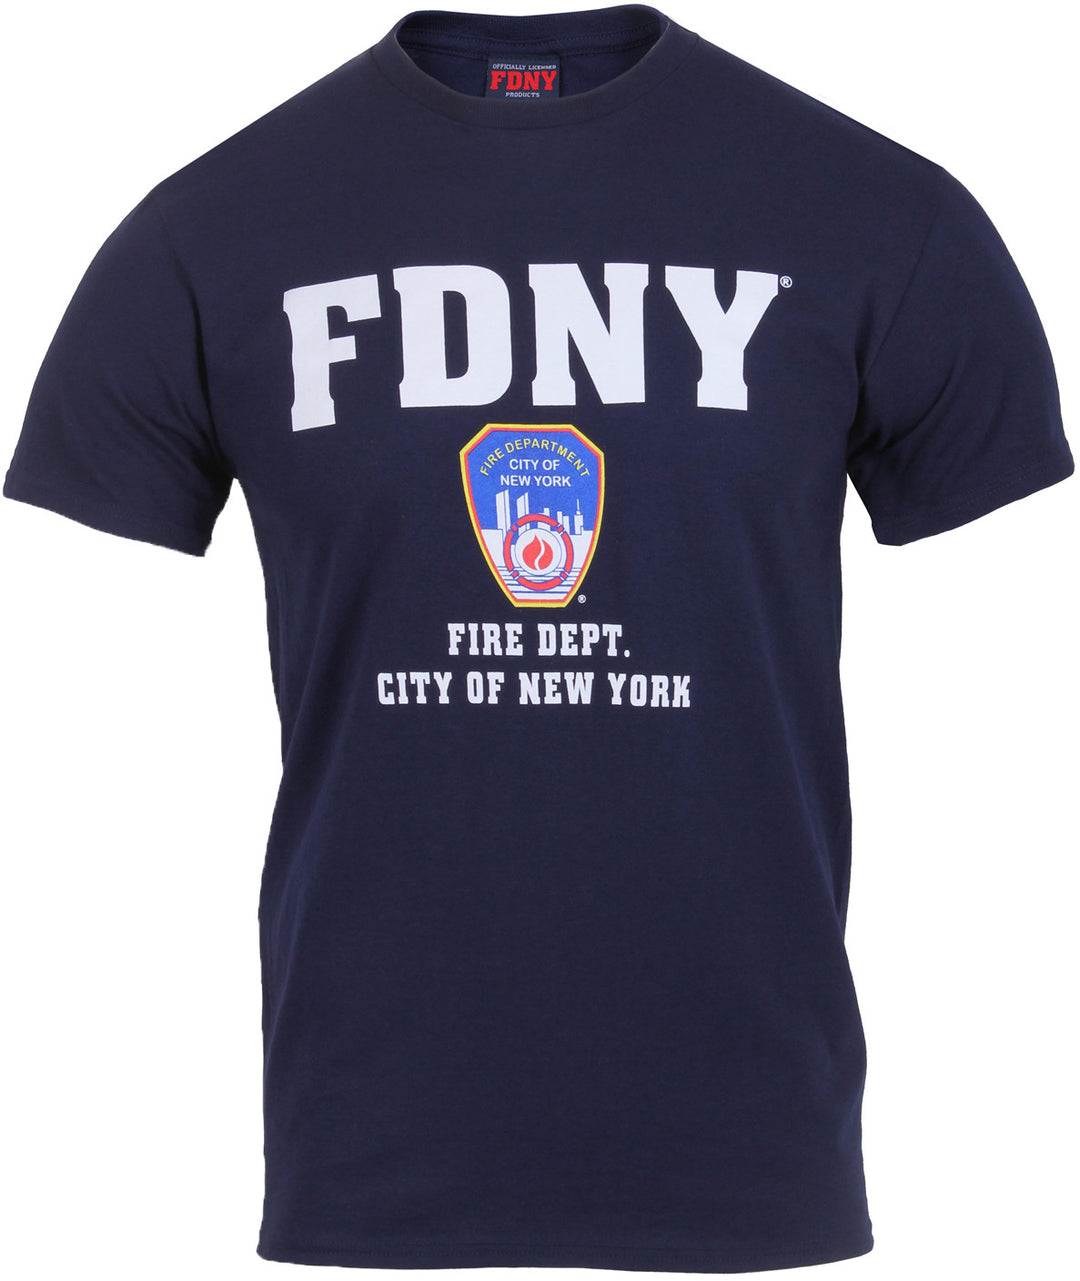 Officially Licenced FDNY New York City Fire Department T-Shirt | Navy